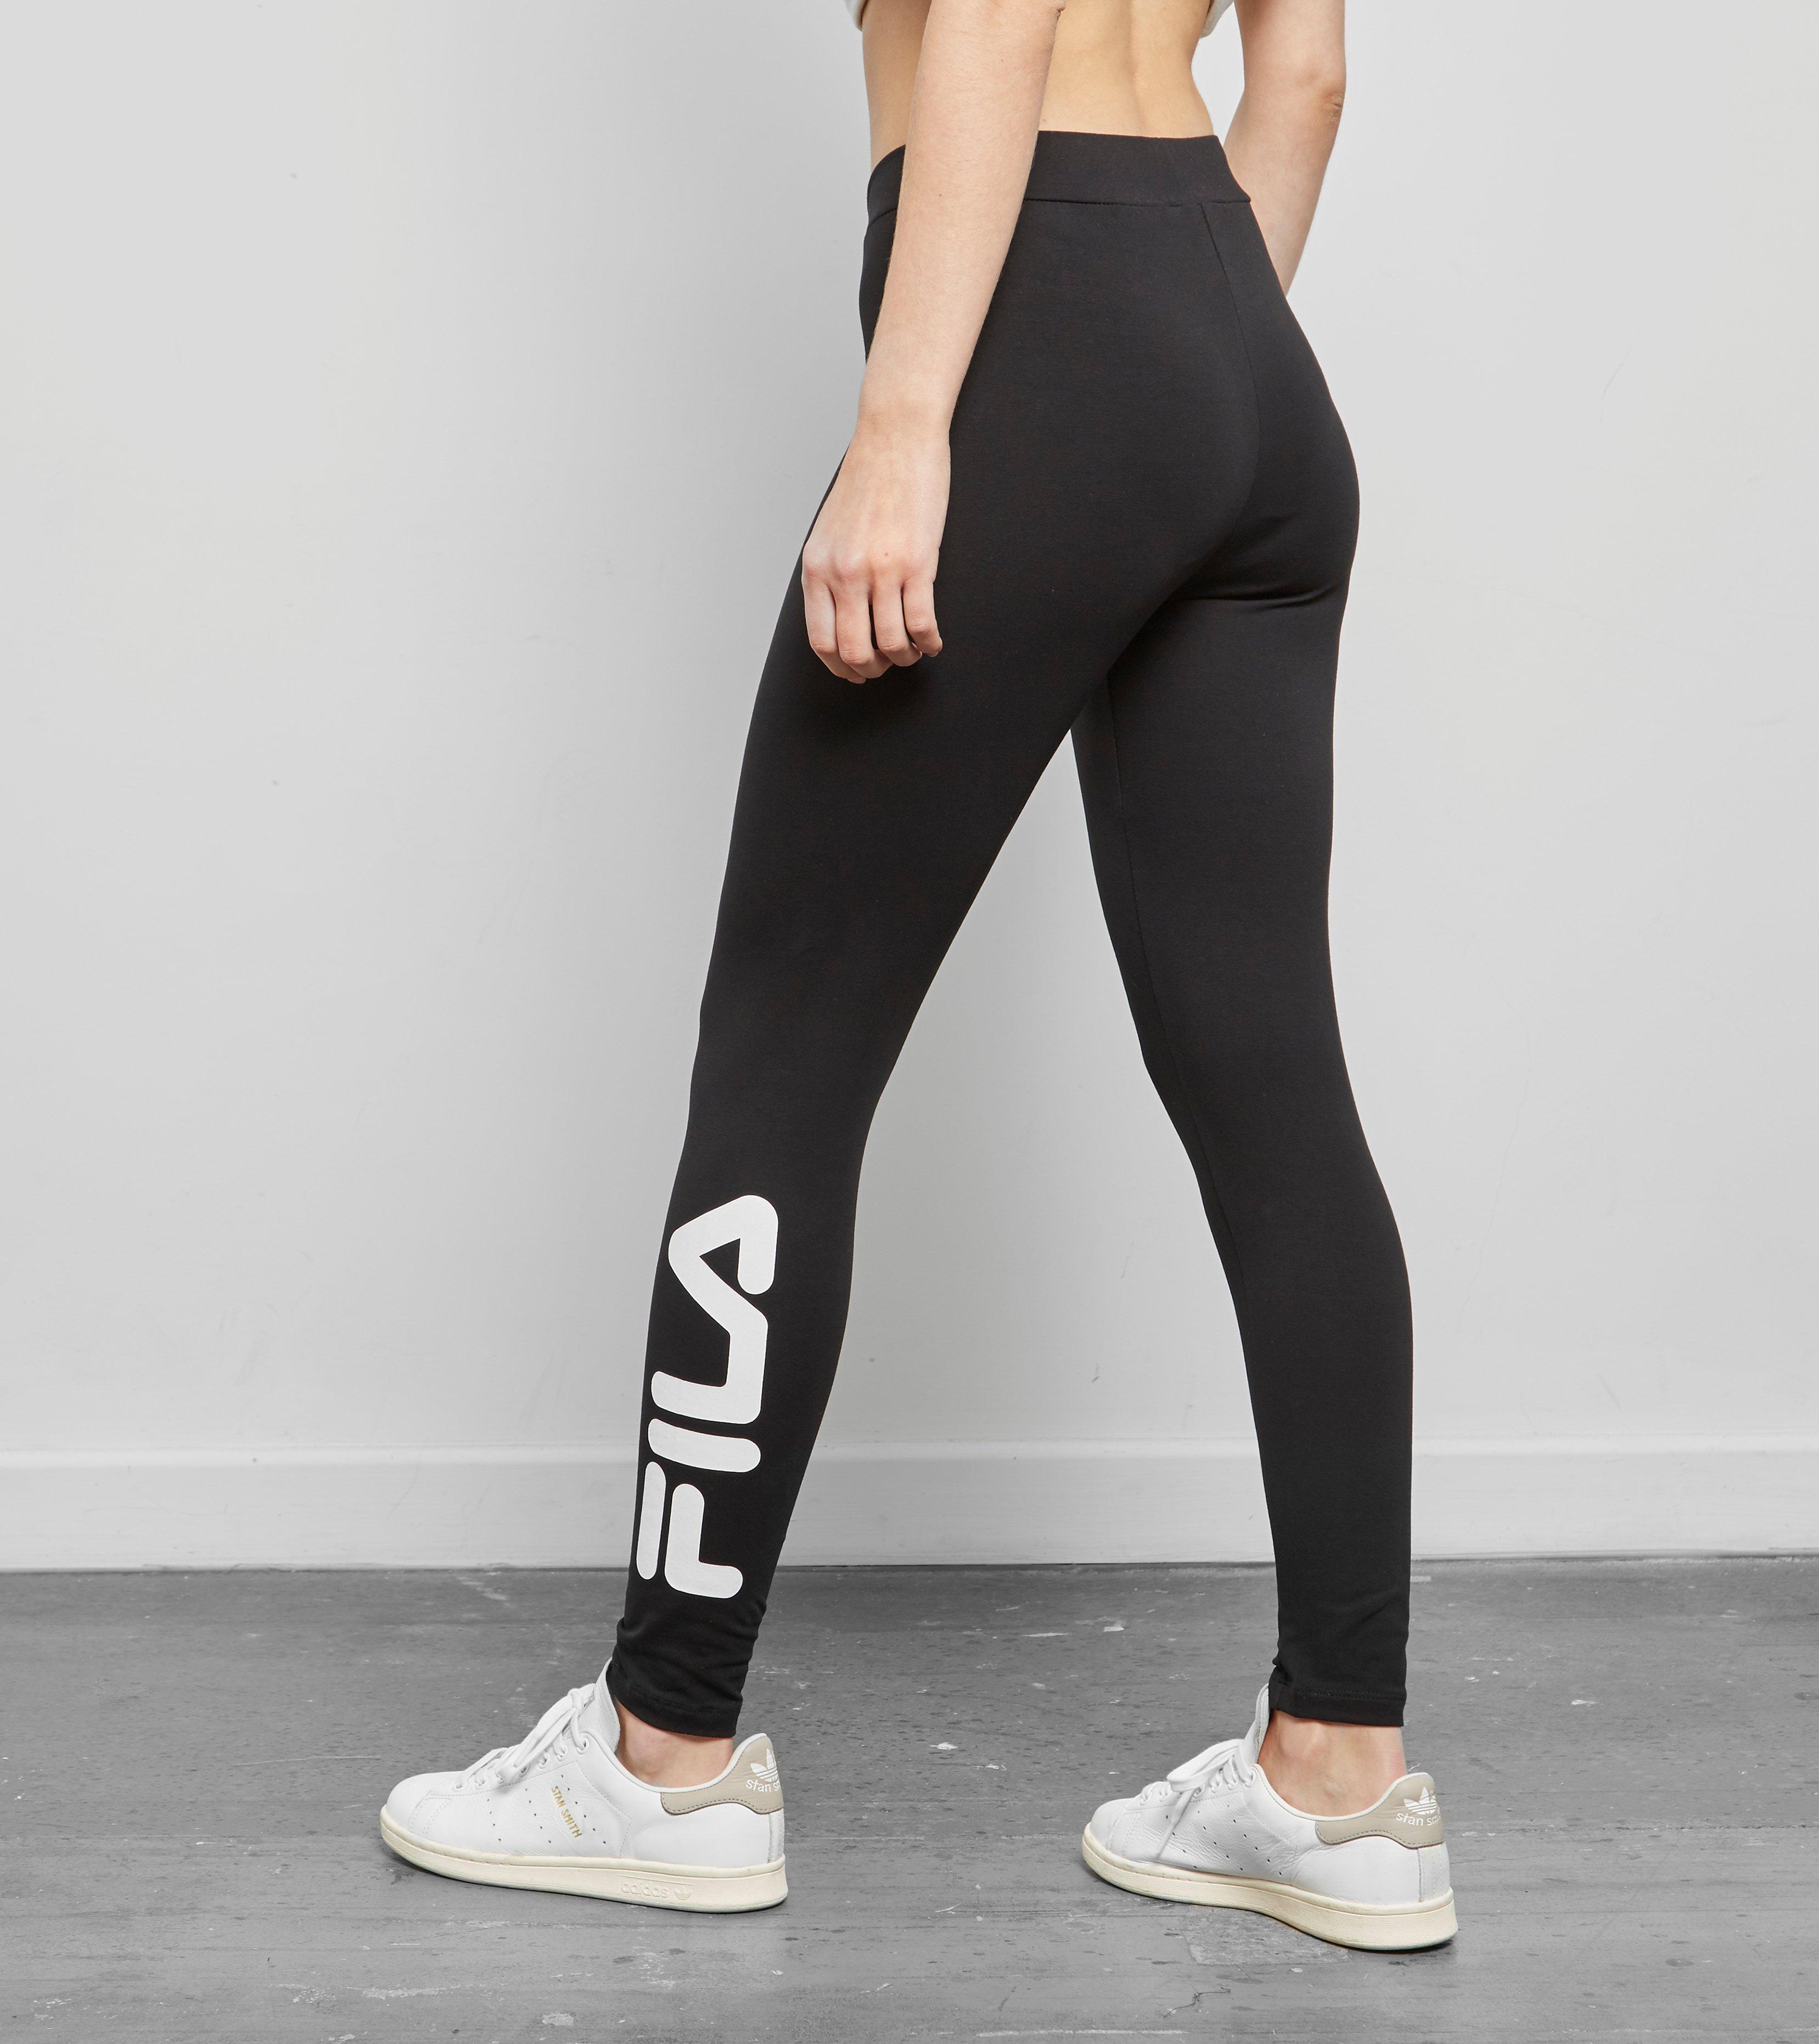 Parma High Waisted Workout Leggings